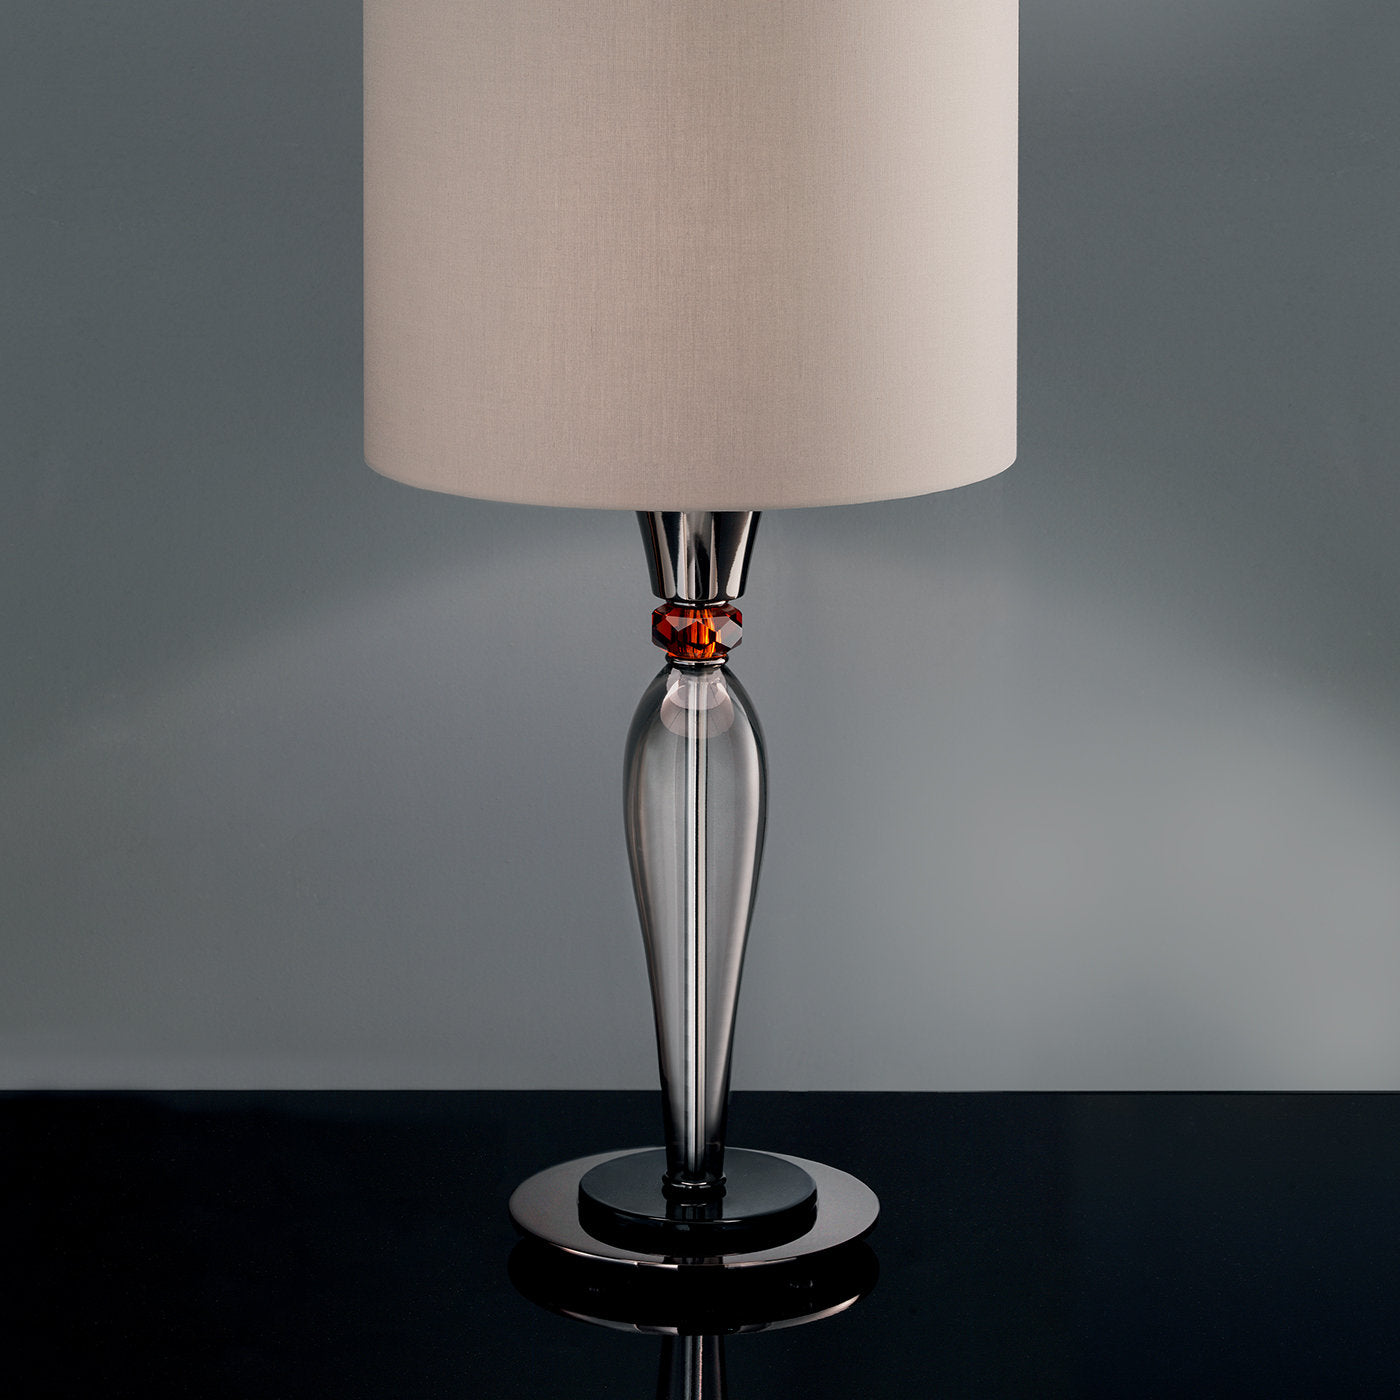 Olympia LG1 table lamp - Alternative view 1